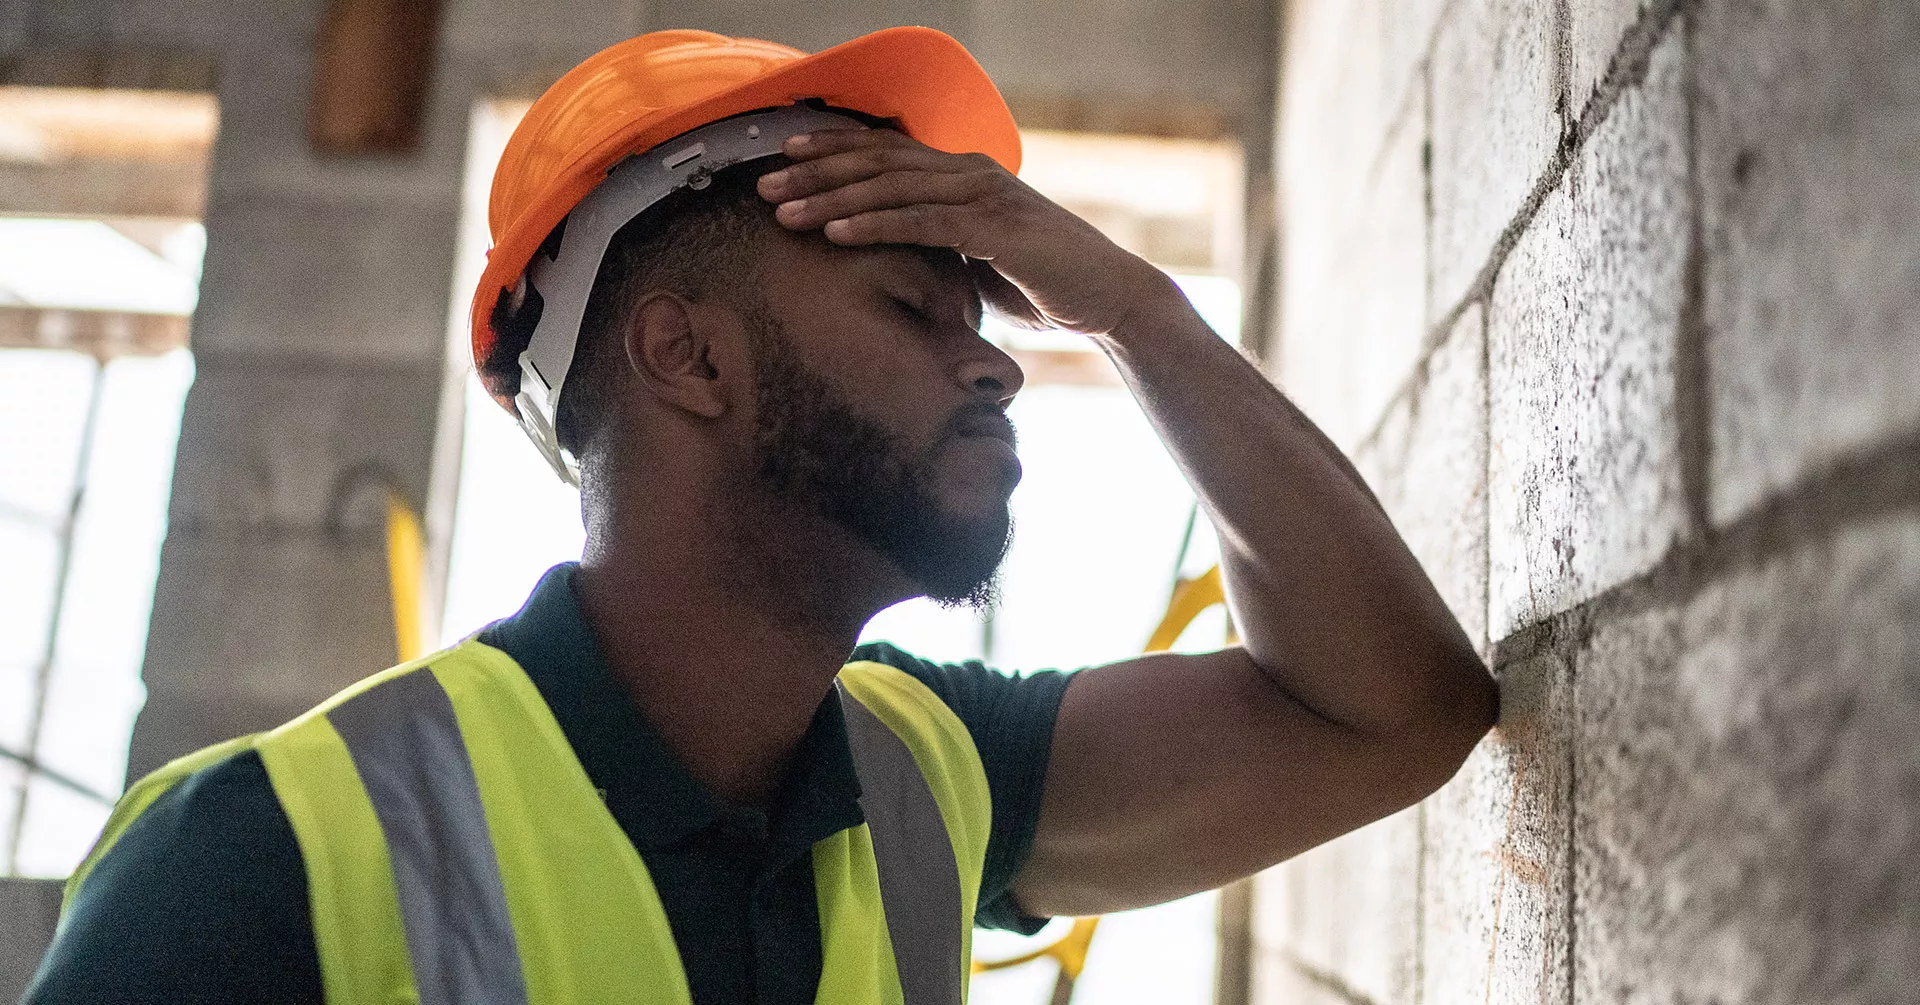 Heat Stress Prevention in the Workplace